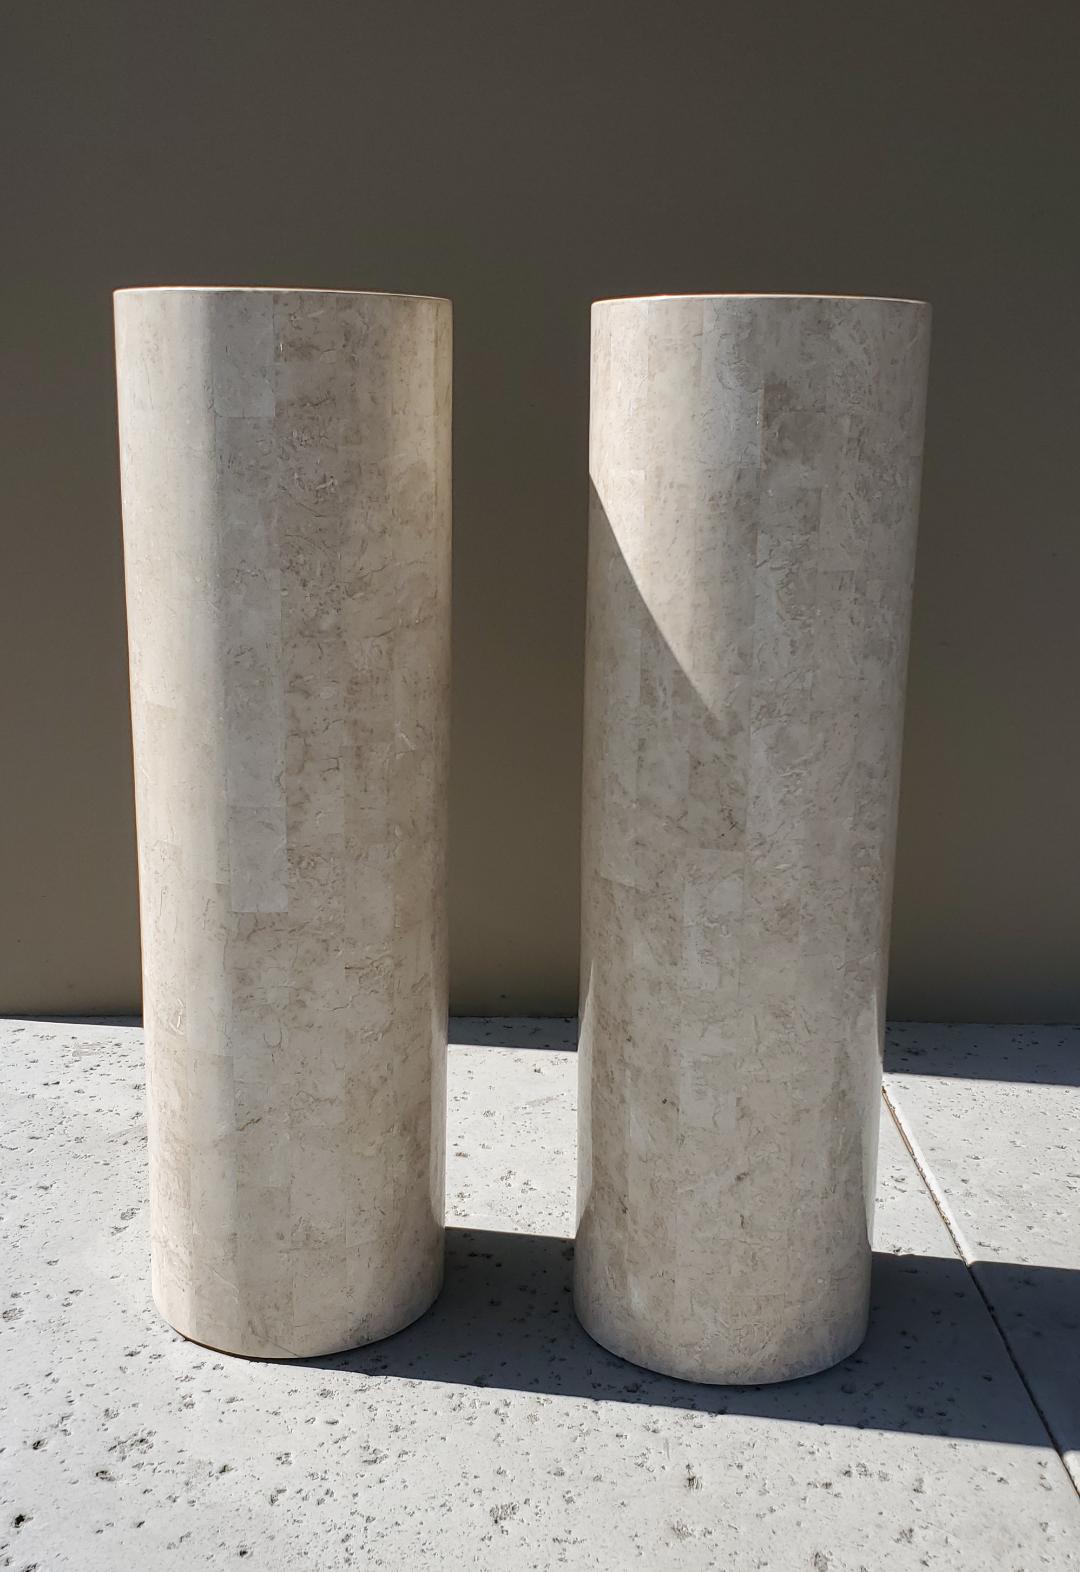 Marquis Collection of Beverly Hills, 1980s Round Tessellated Stone Pedestals 2 8